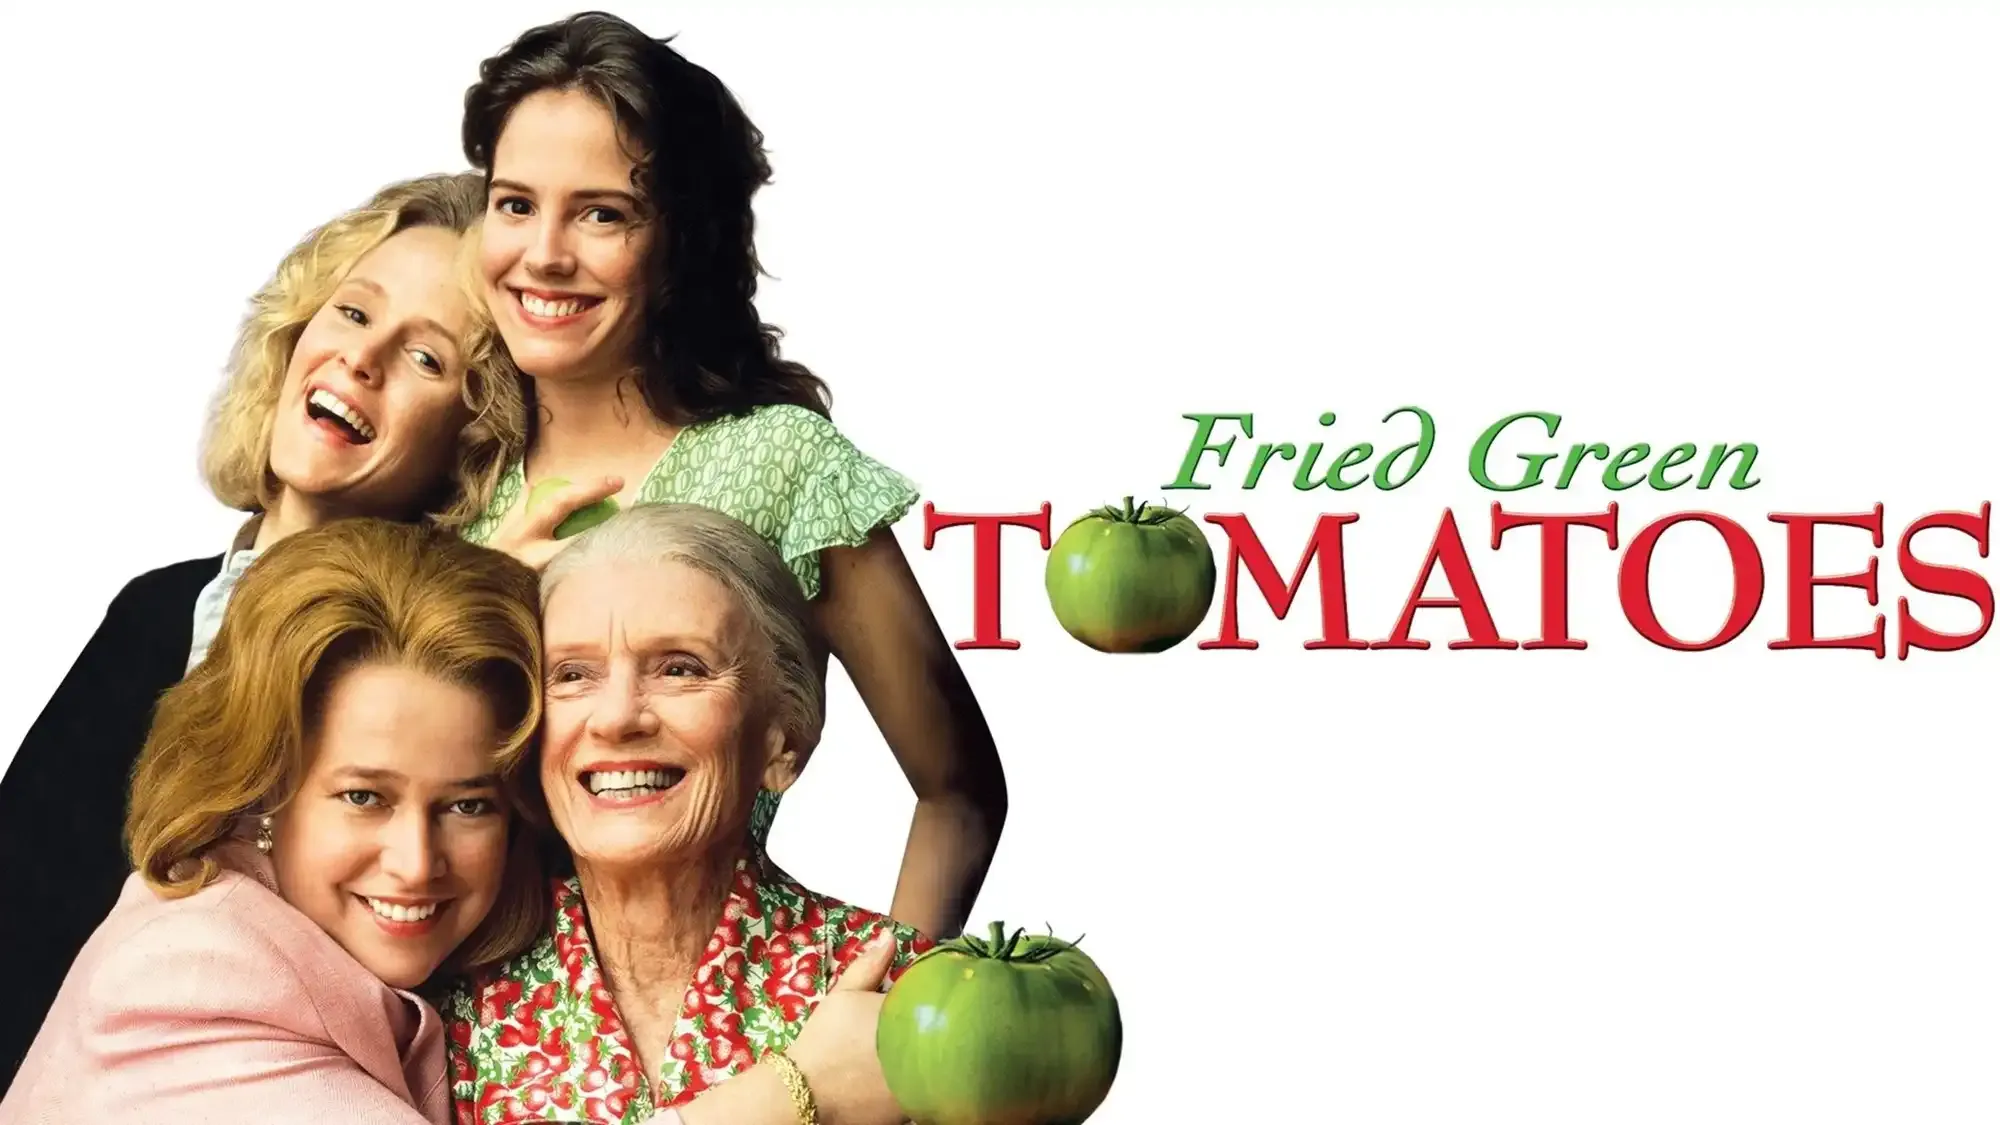 Fried Green Tomatoes movie review